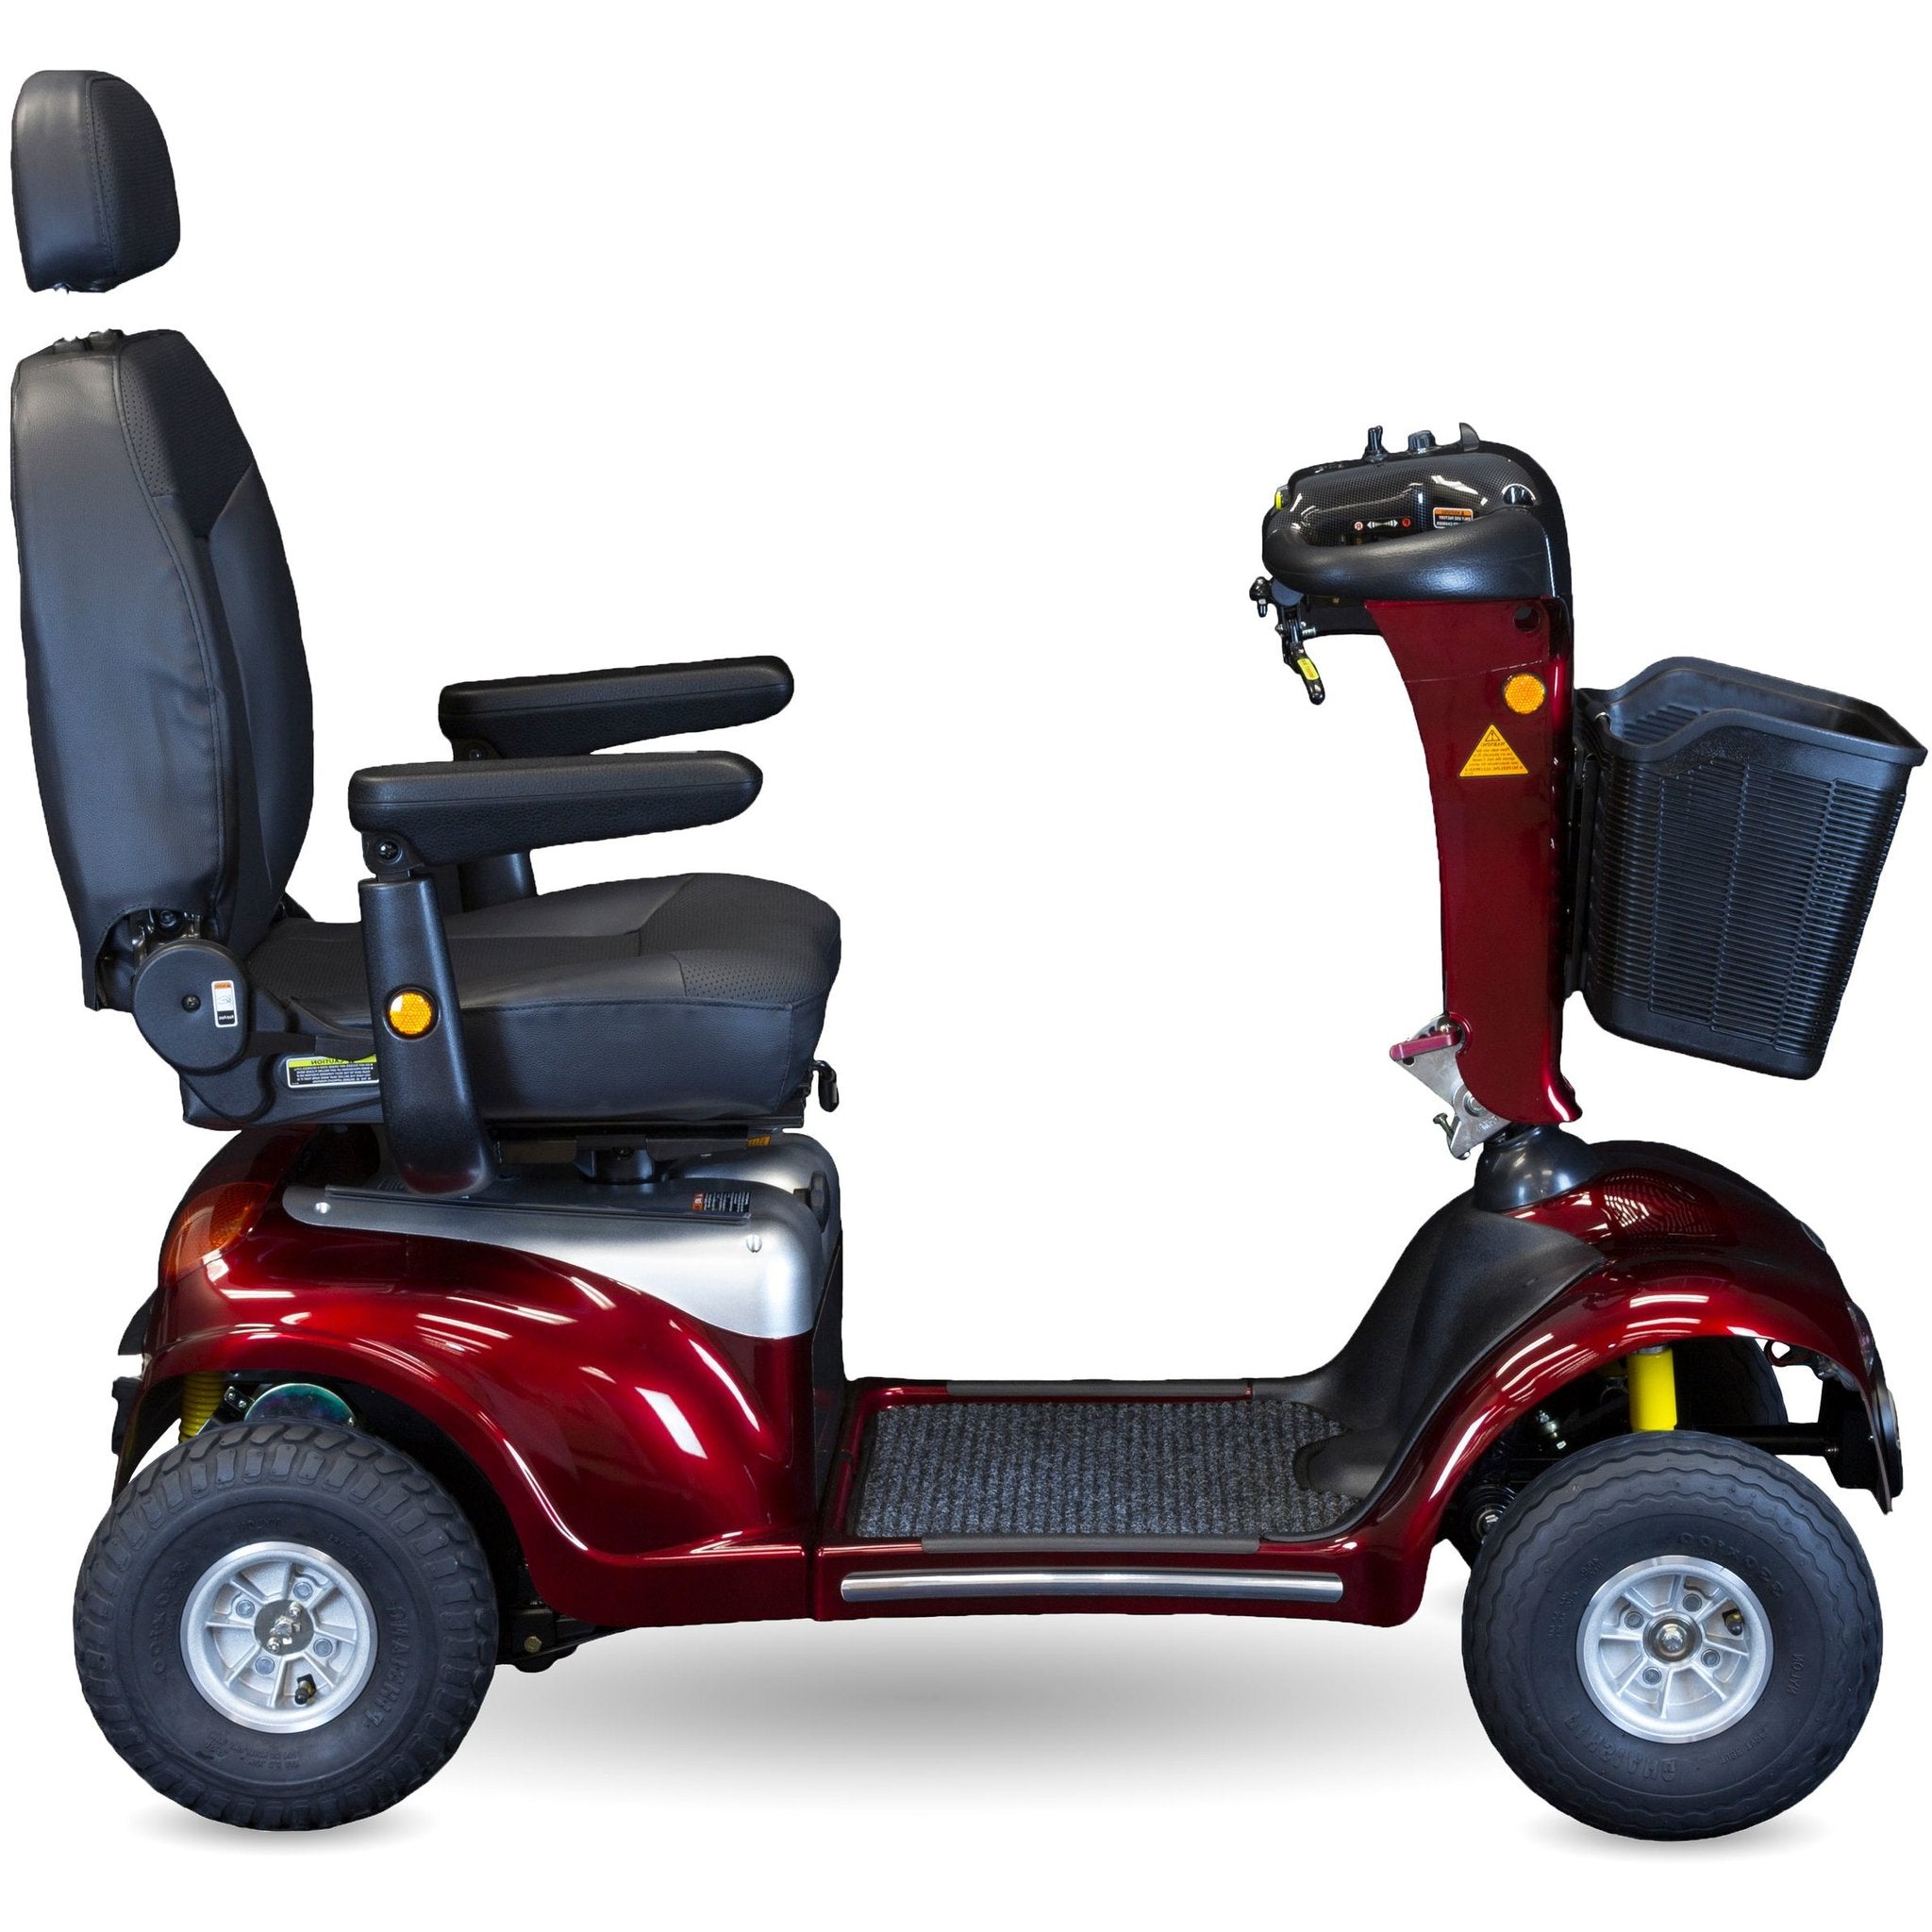 Side image of the shoprider enduro xl 4 four mobility scooter with a captain swivel seat and a basket attached in the front - PUREUPS 